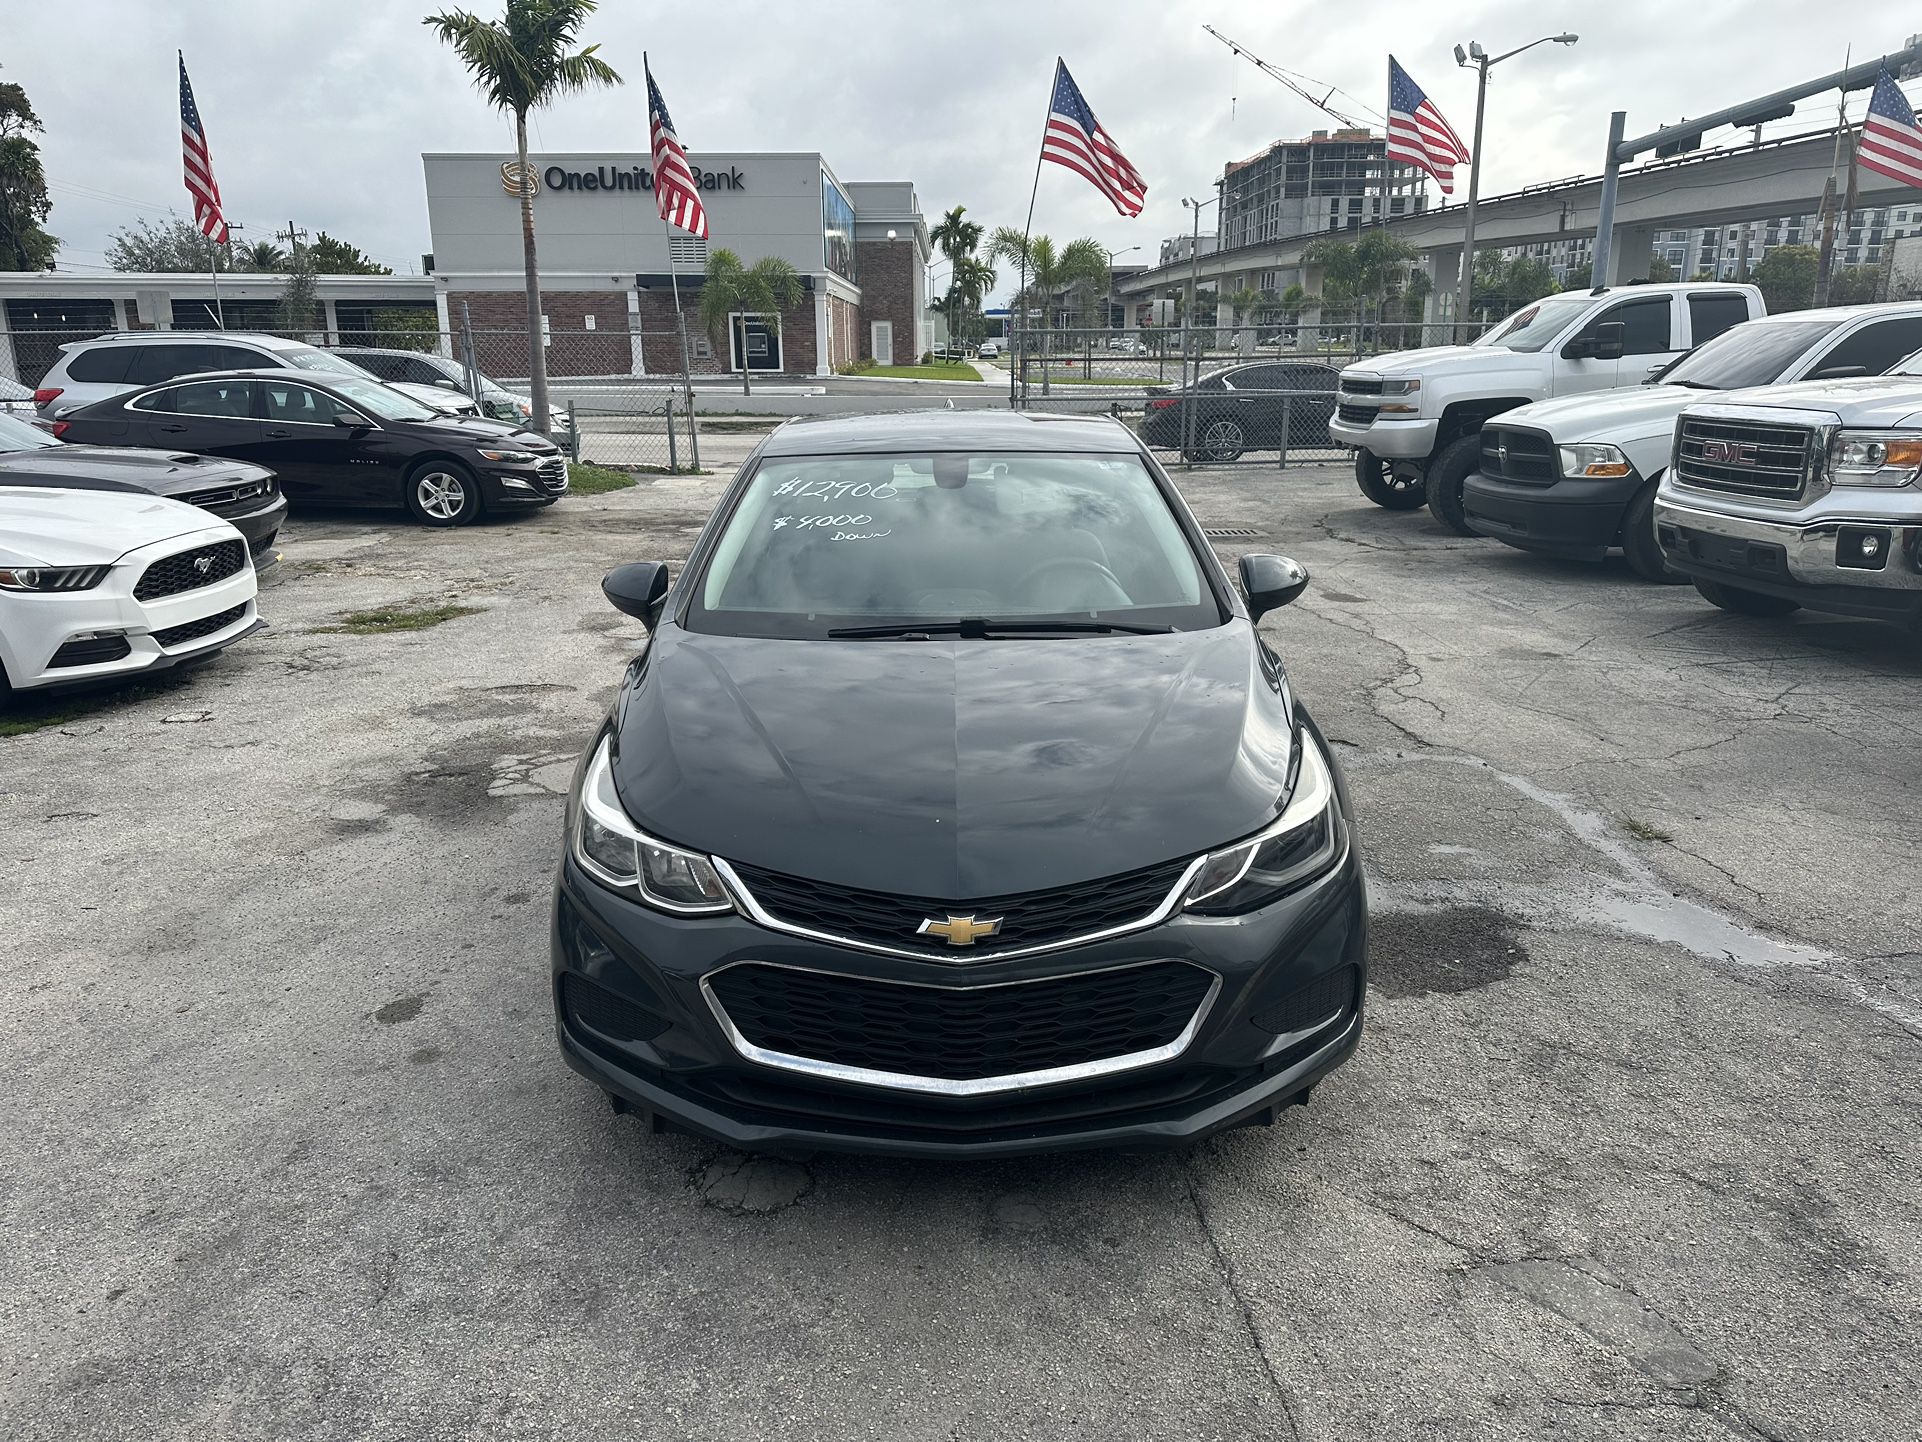 used 2018 chevrolet cruze - front view 3